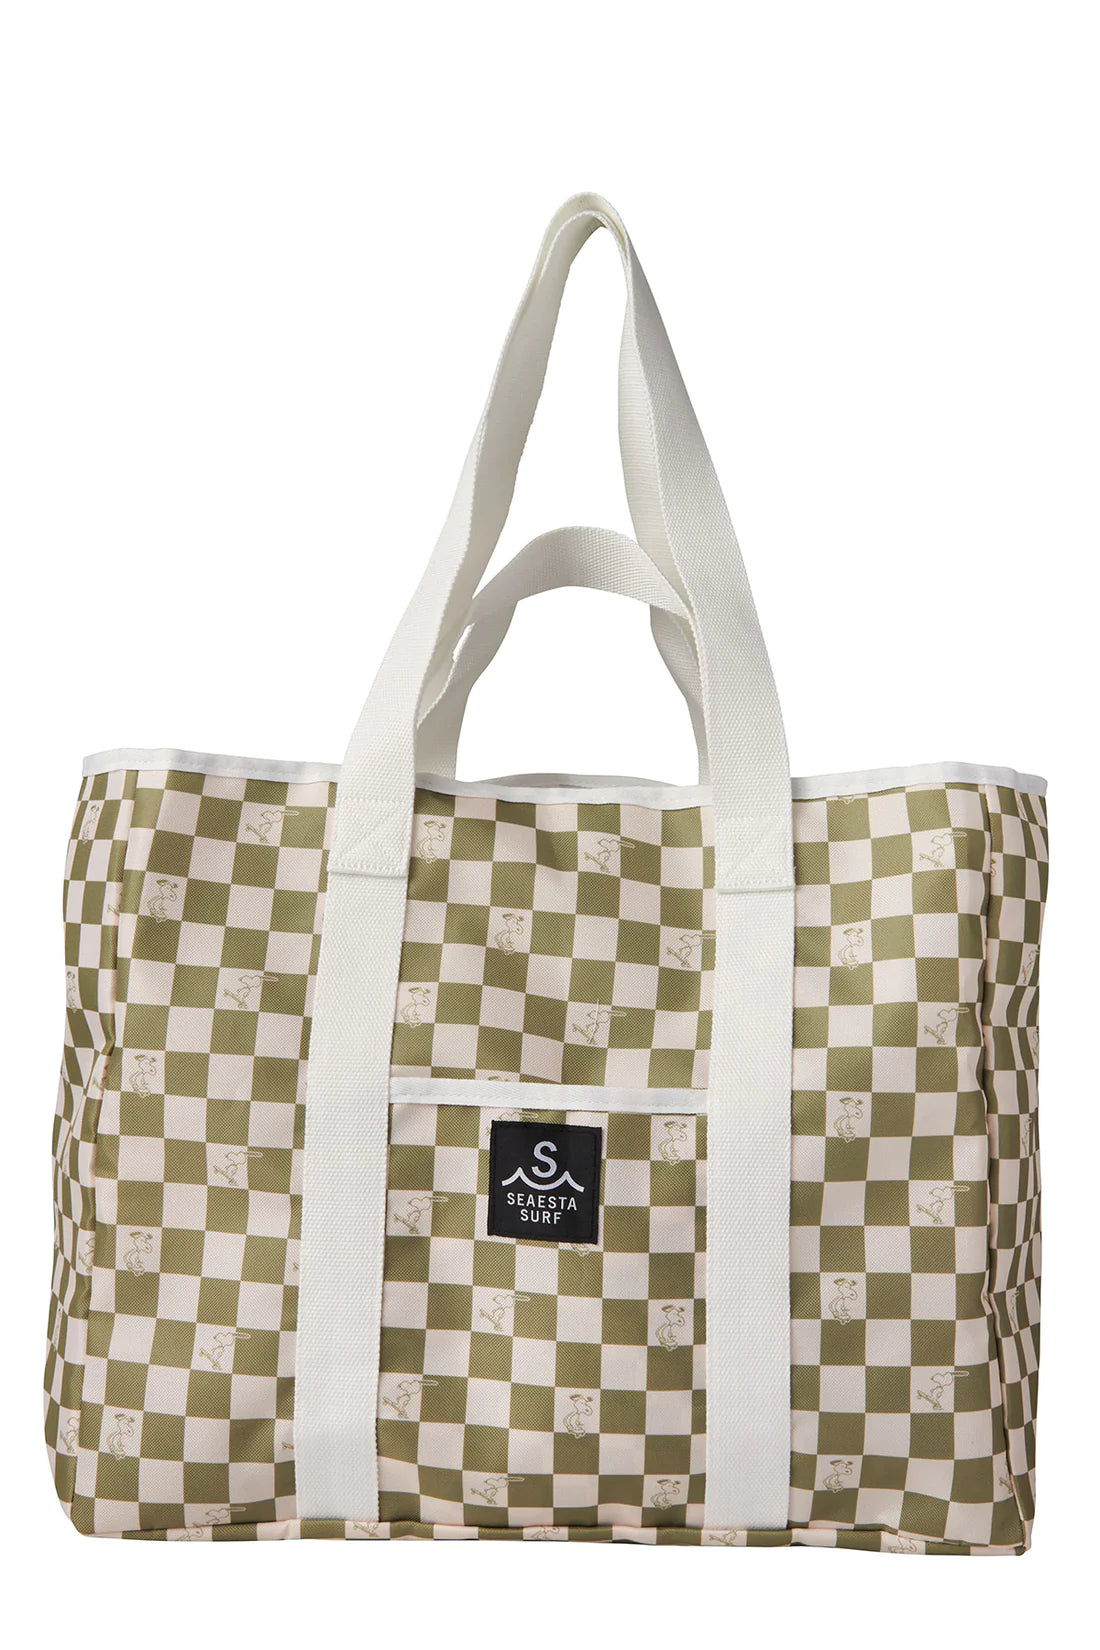 Snoopy Checkered Tote Bag